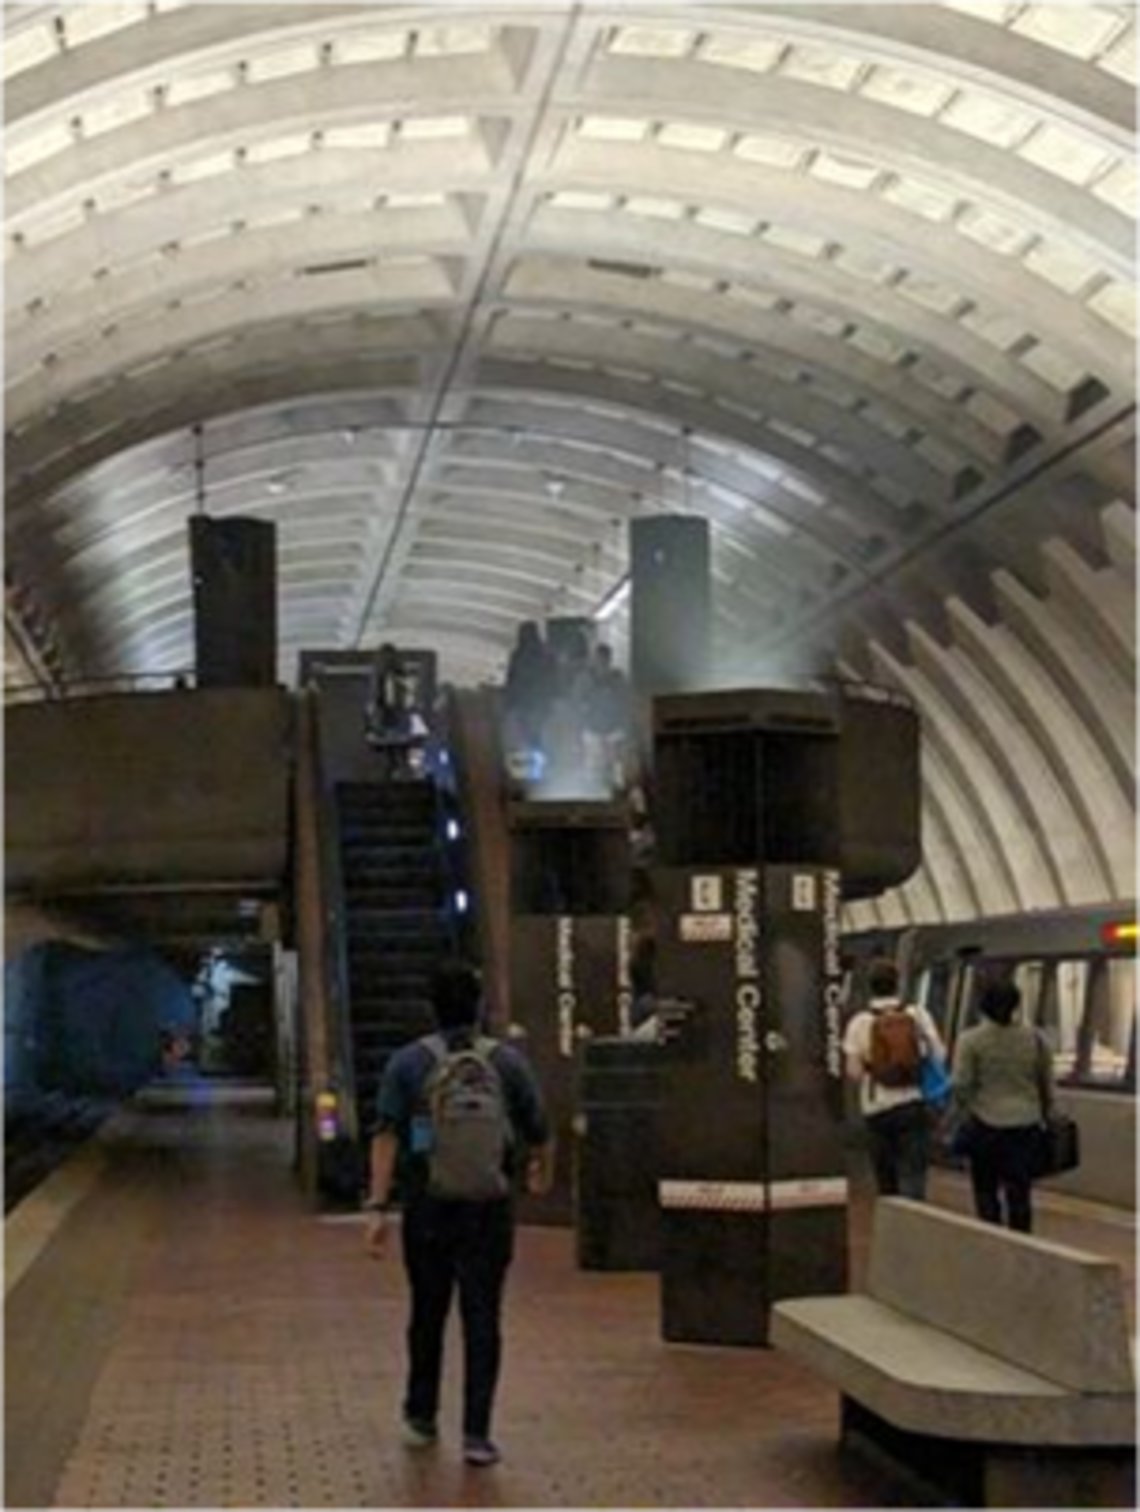 Smoke drifts into the Medical Center Metro Station